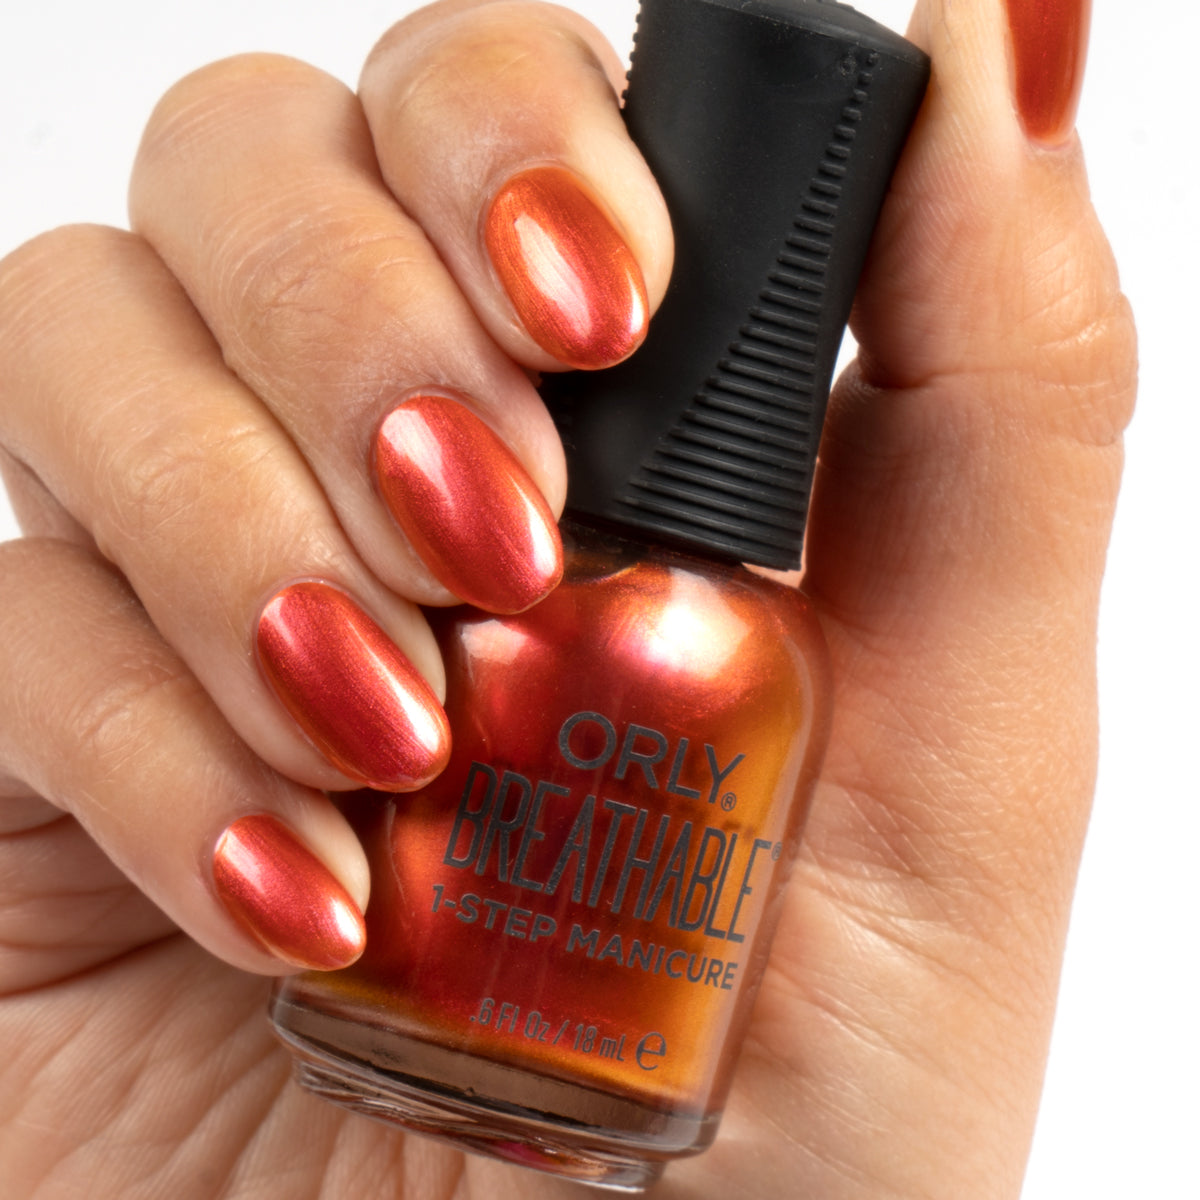 Orly lacquer in Red Flare reviews in Nail Polish - ChickAdvisor